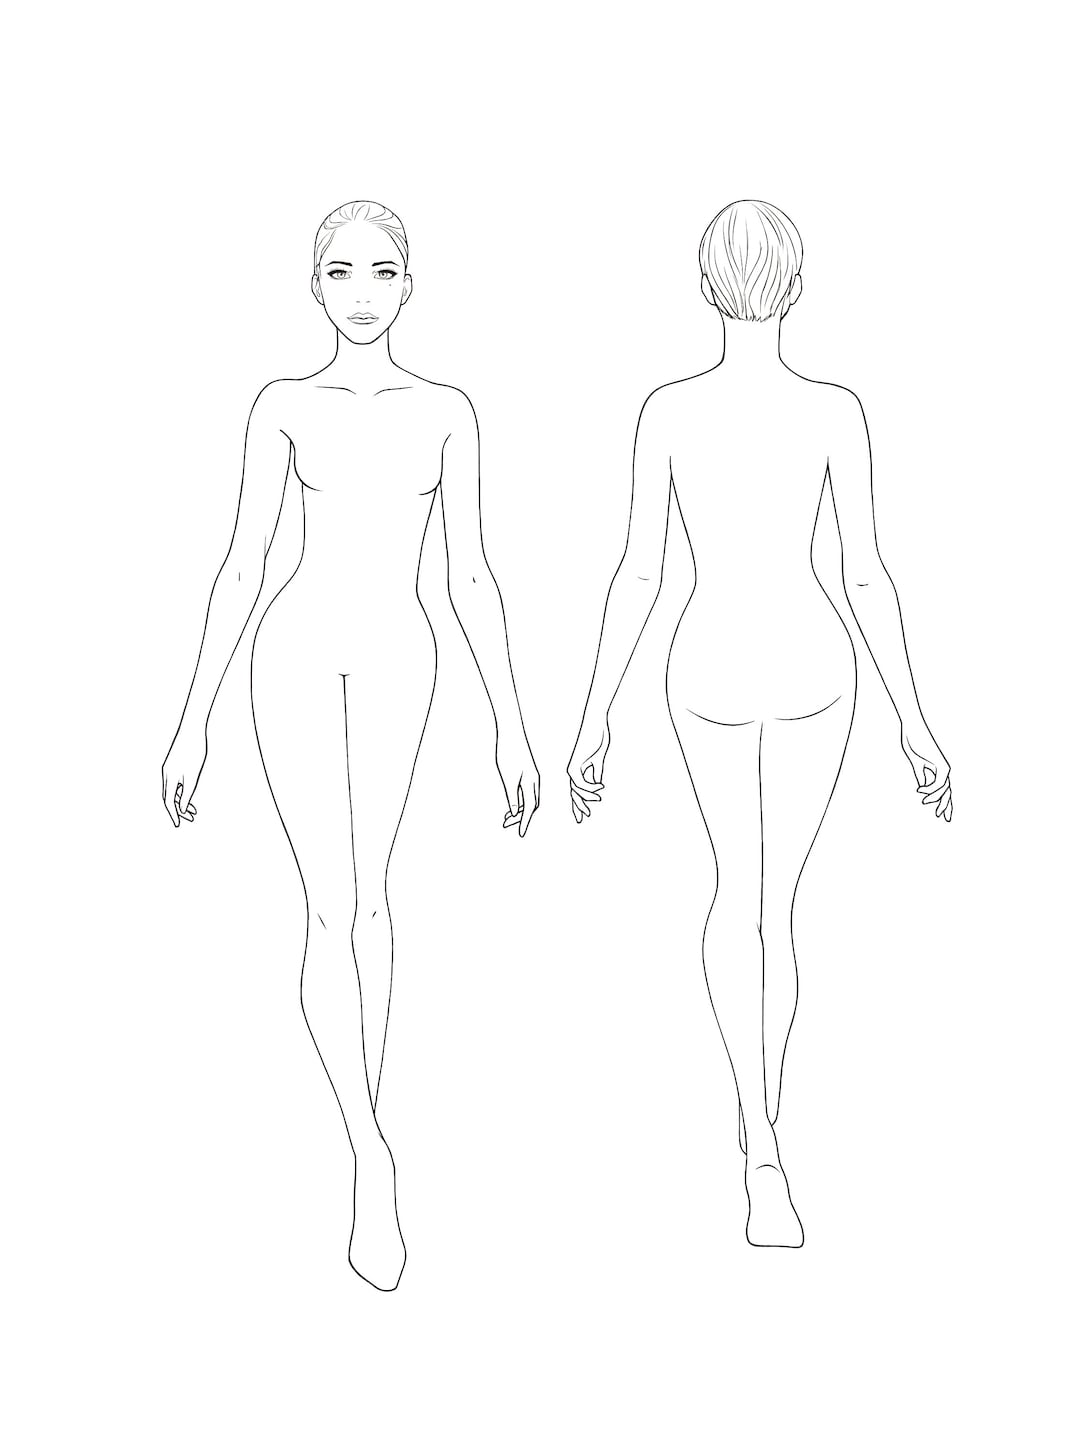 This is entry #31 by dyeth in a crowdsourcing contest Illustration Design  for female body shapes/ typ…